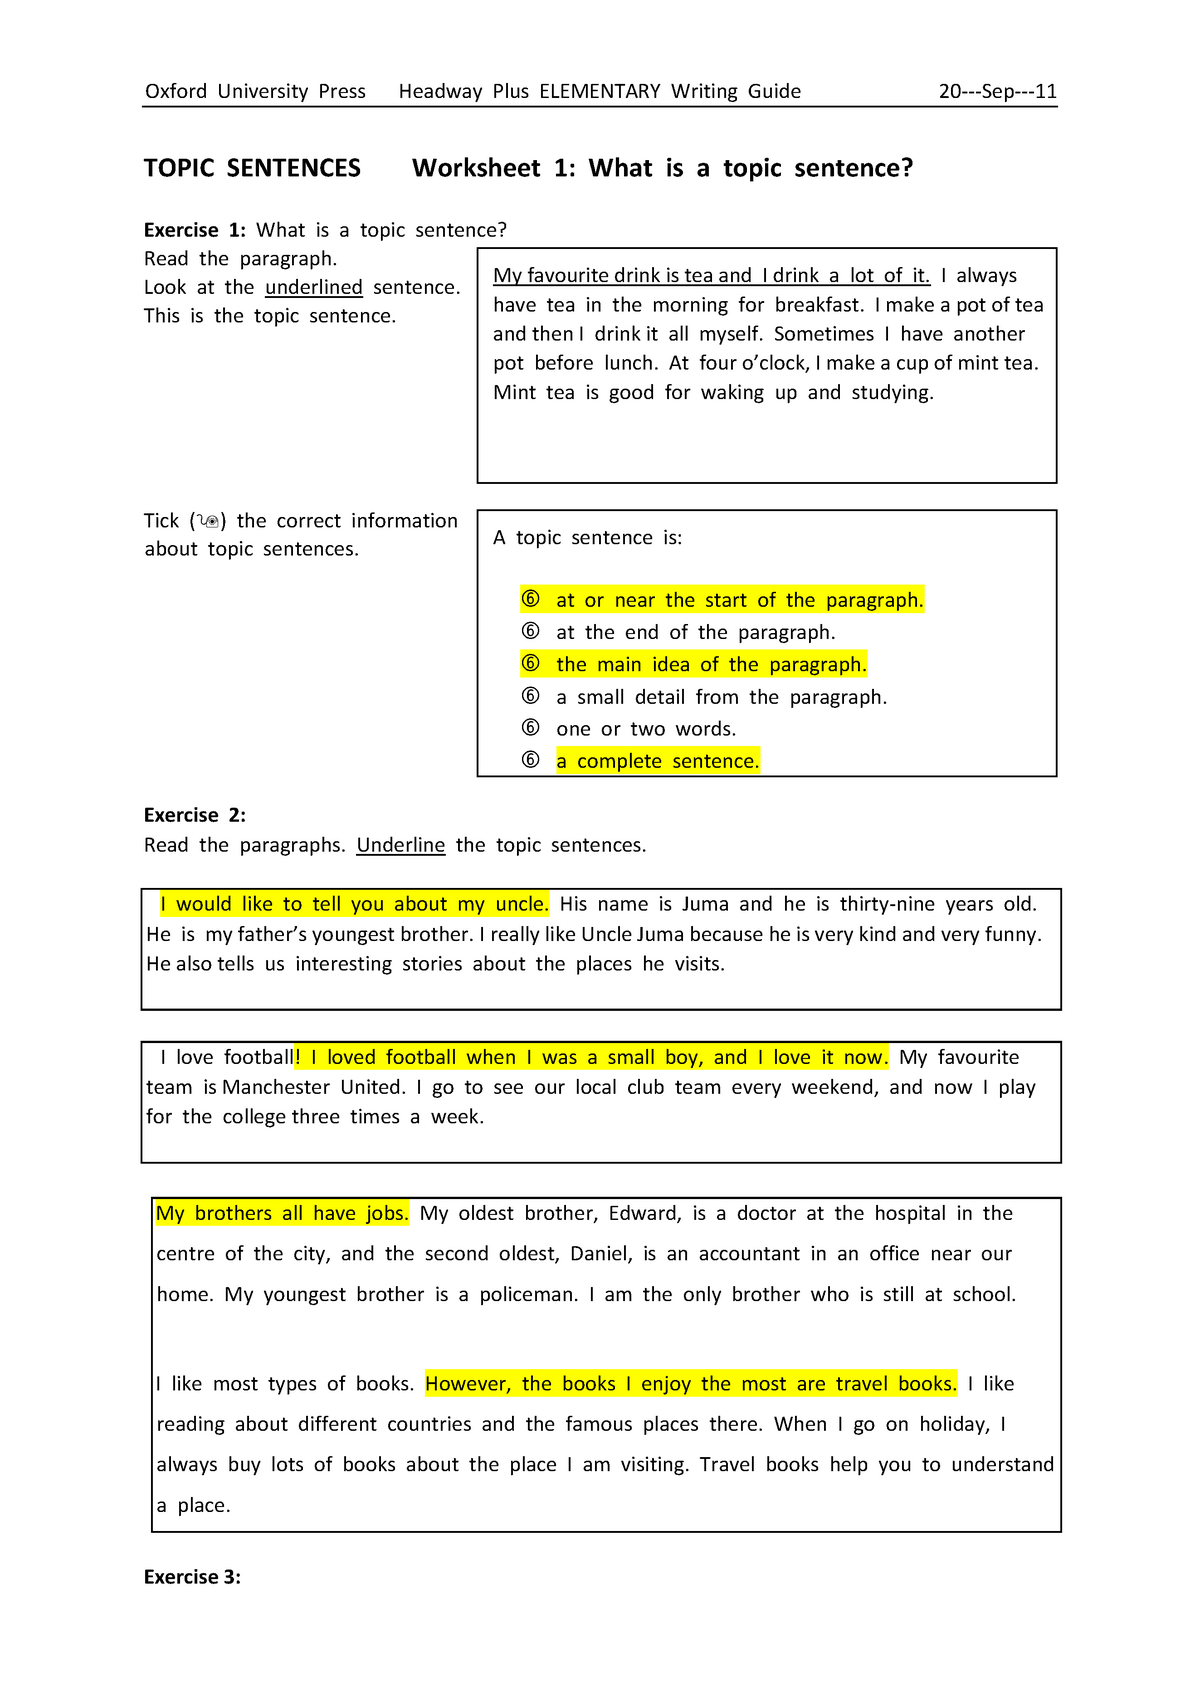 Topic Sentences Worksheet 1 TOPIC SENTENCES Worksheet 1 What Is A 